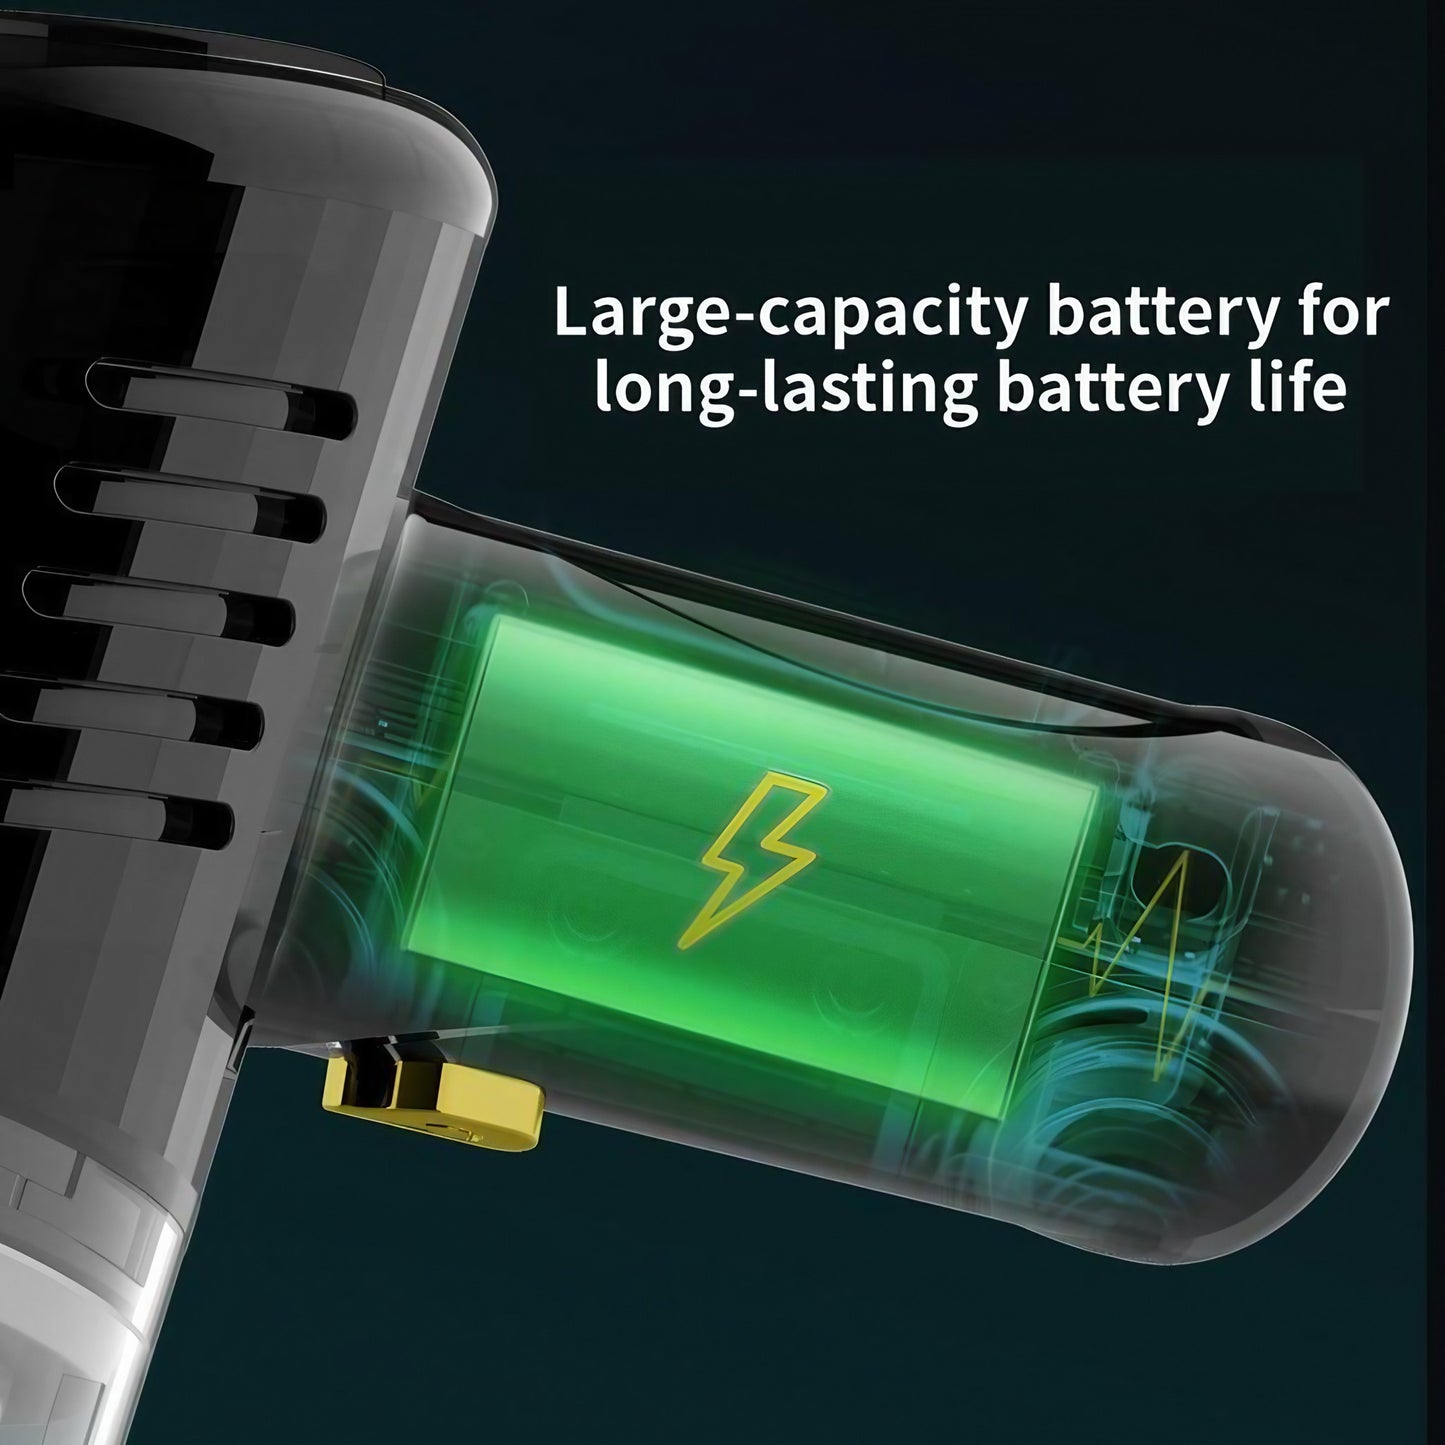 Small vacuum cleaner highlighting its long-lasting battery feature